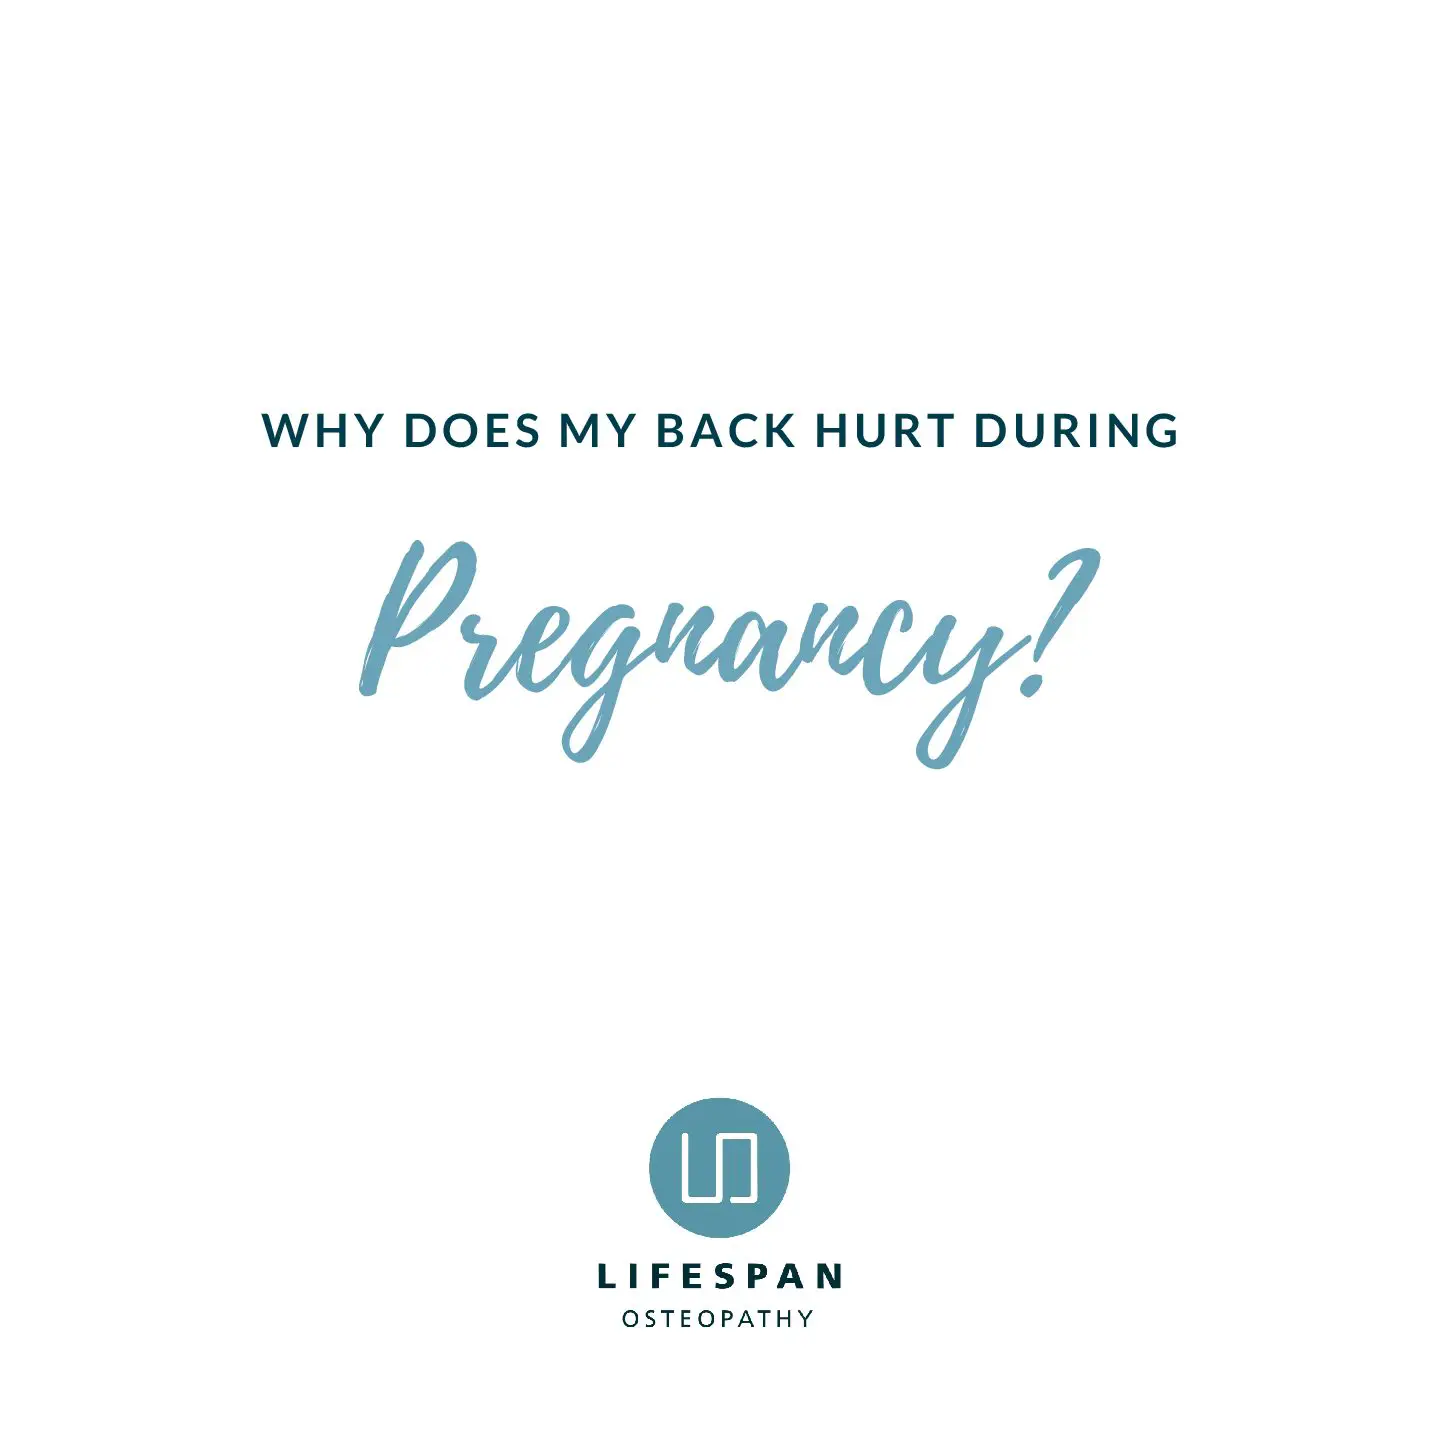 Why Does My Back Hurt During Pregnancy?